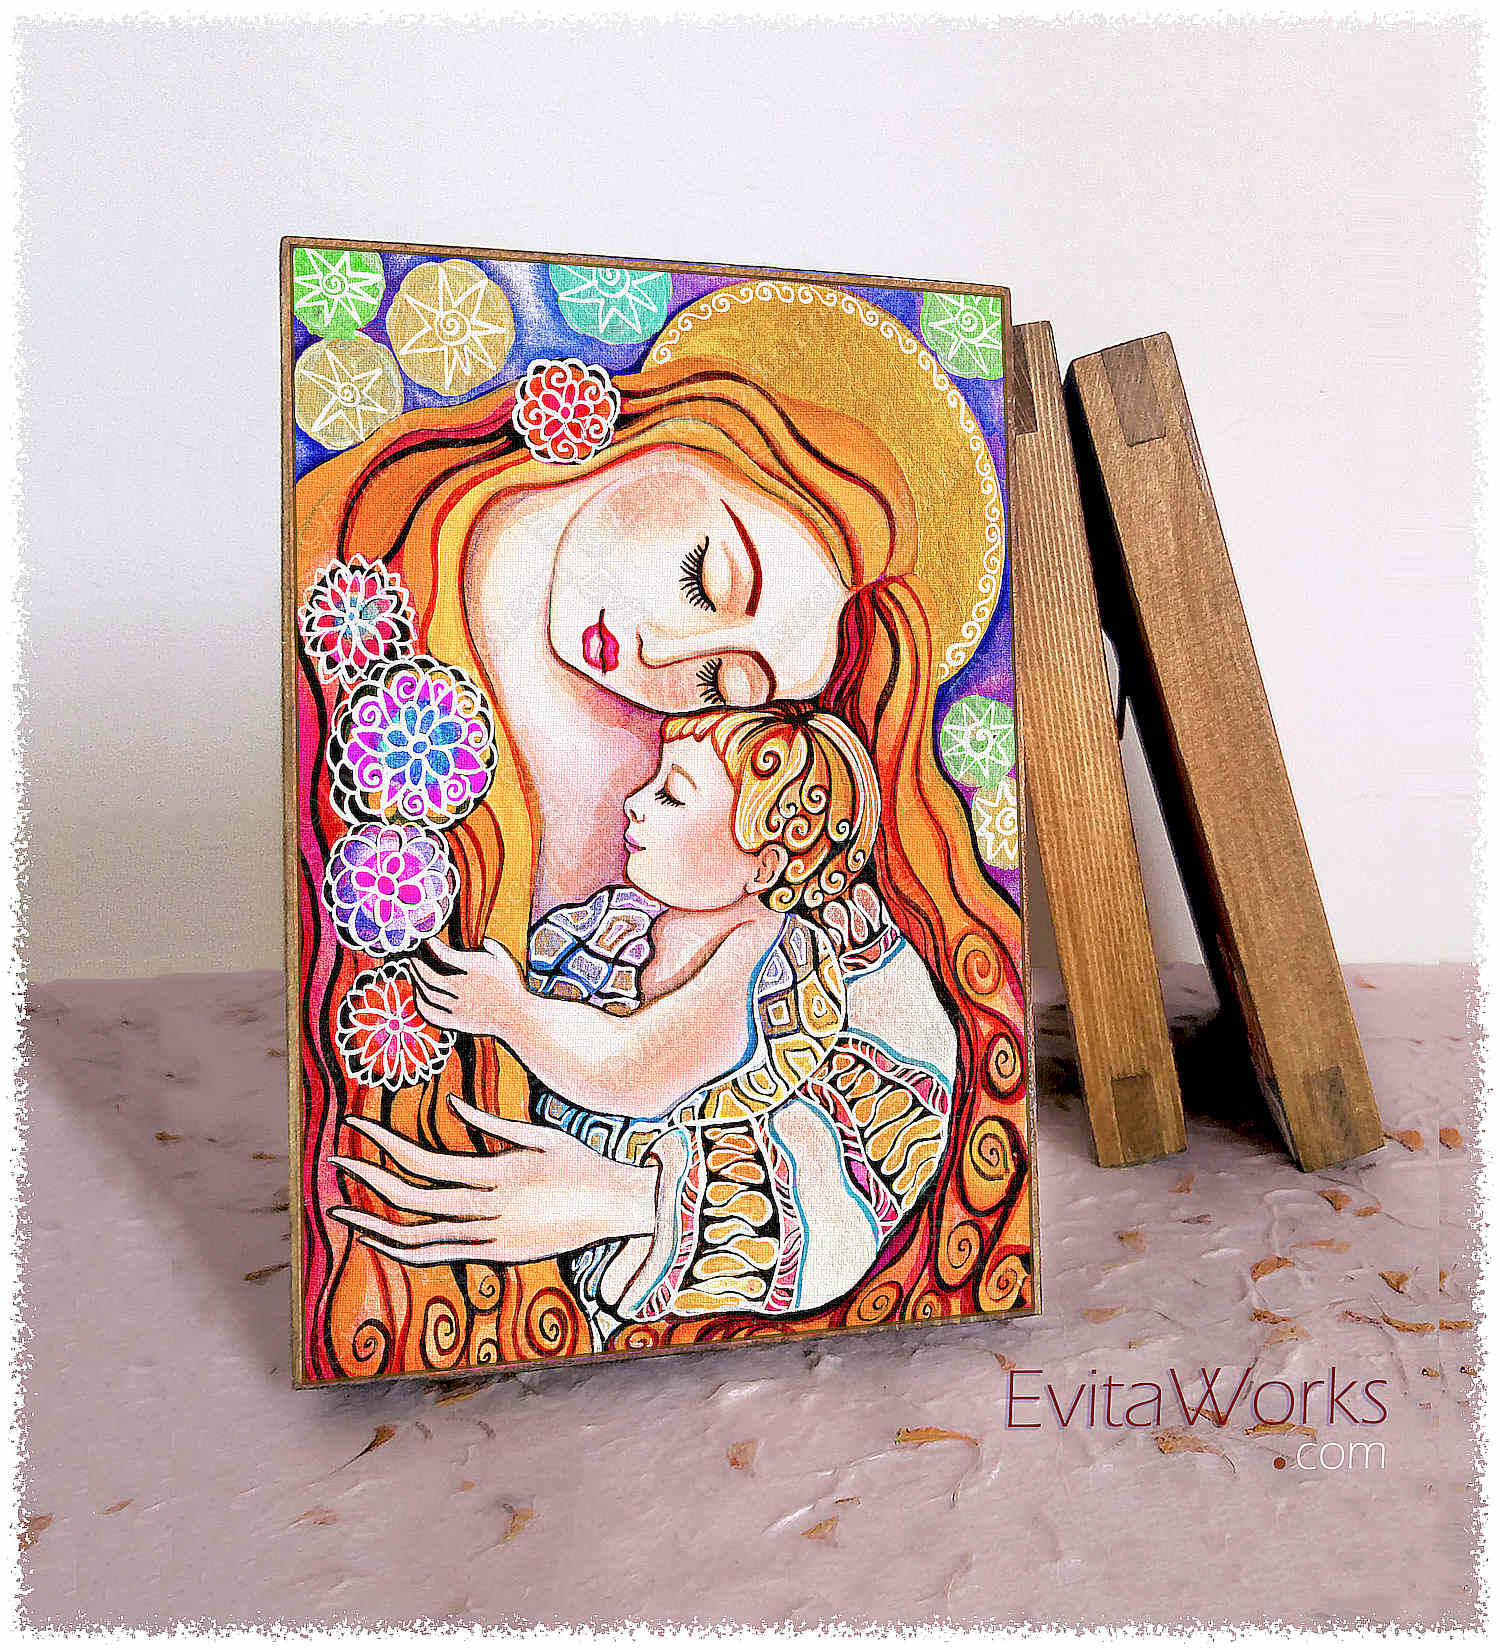 Hit to learn about "Little Angel Sleeping, Mother and Child" on woodblocks